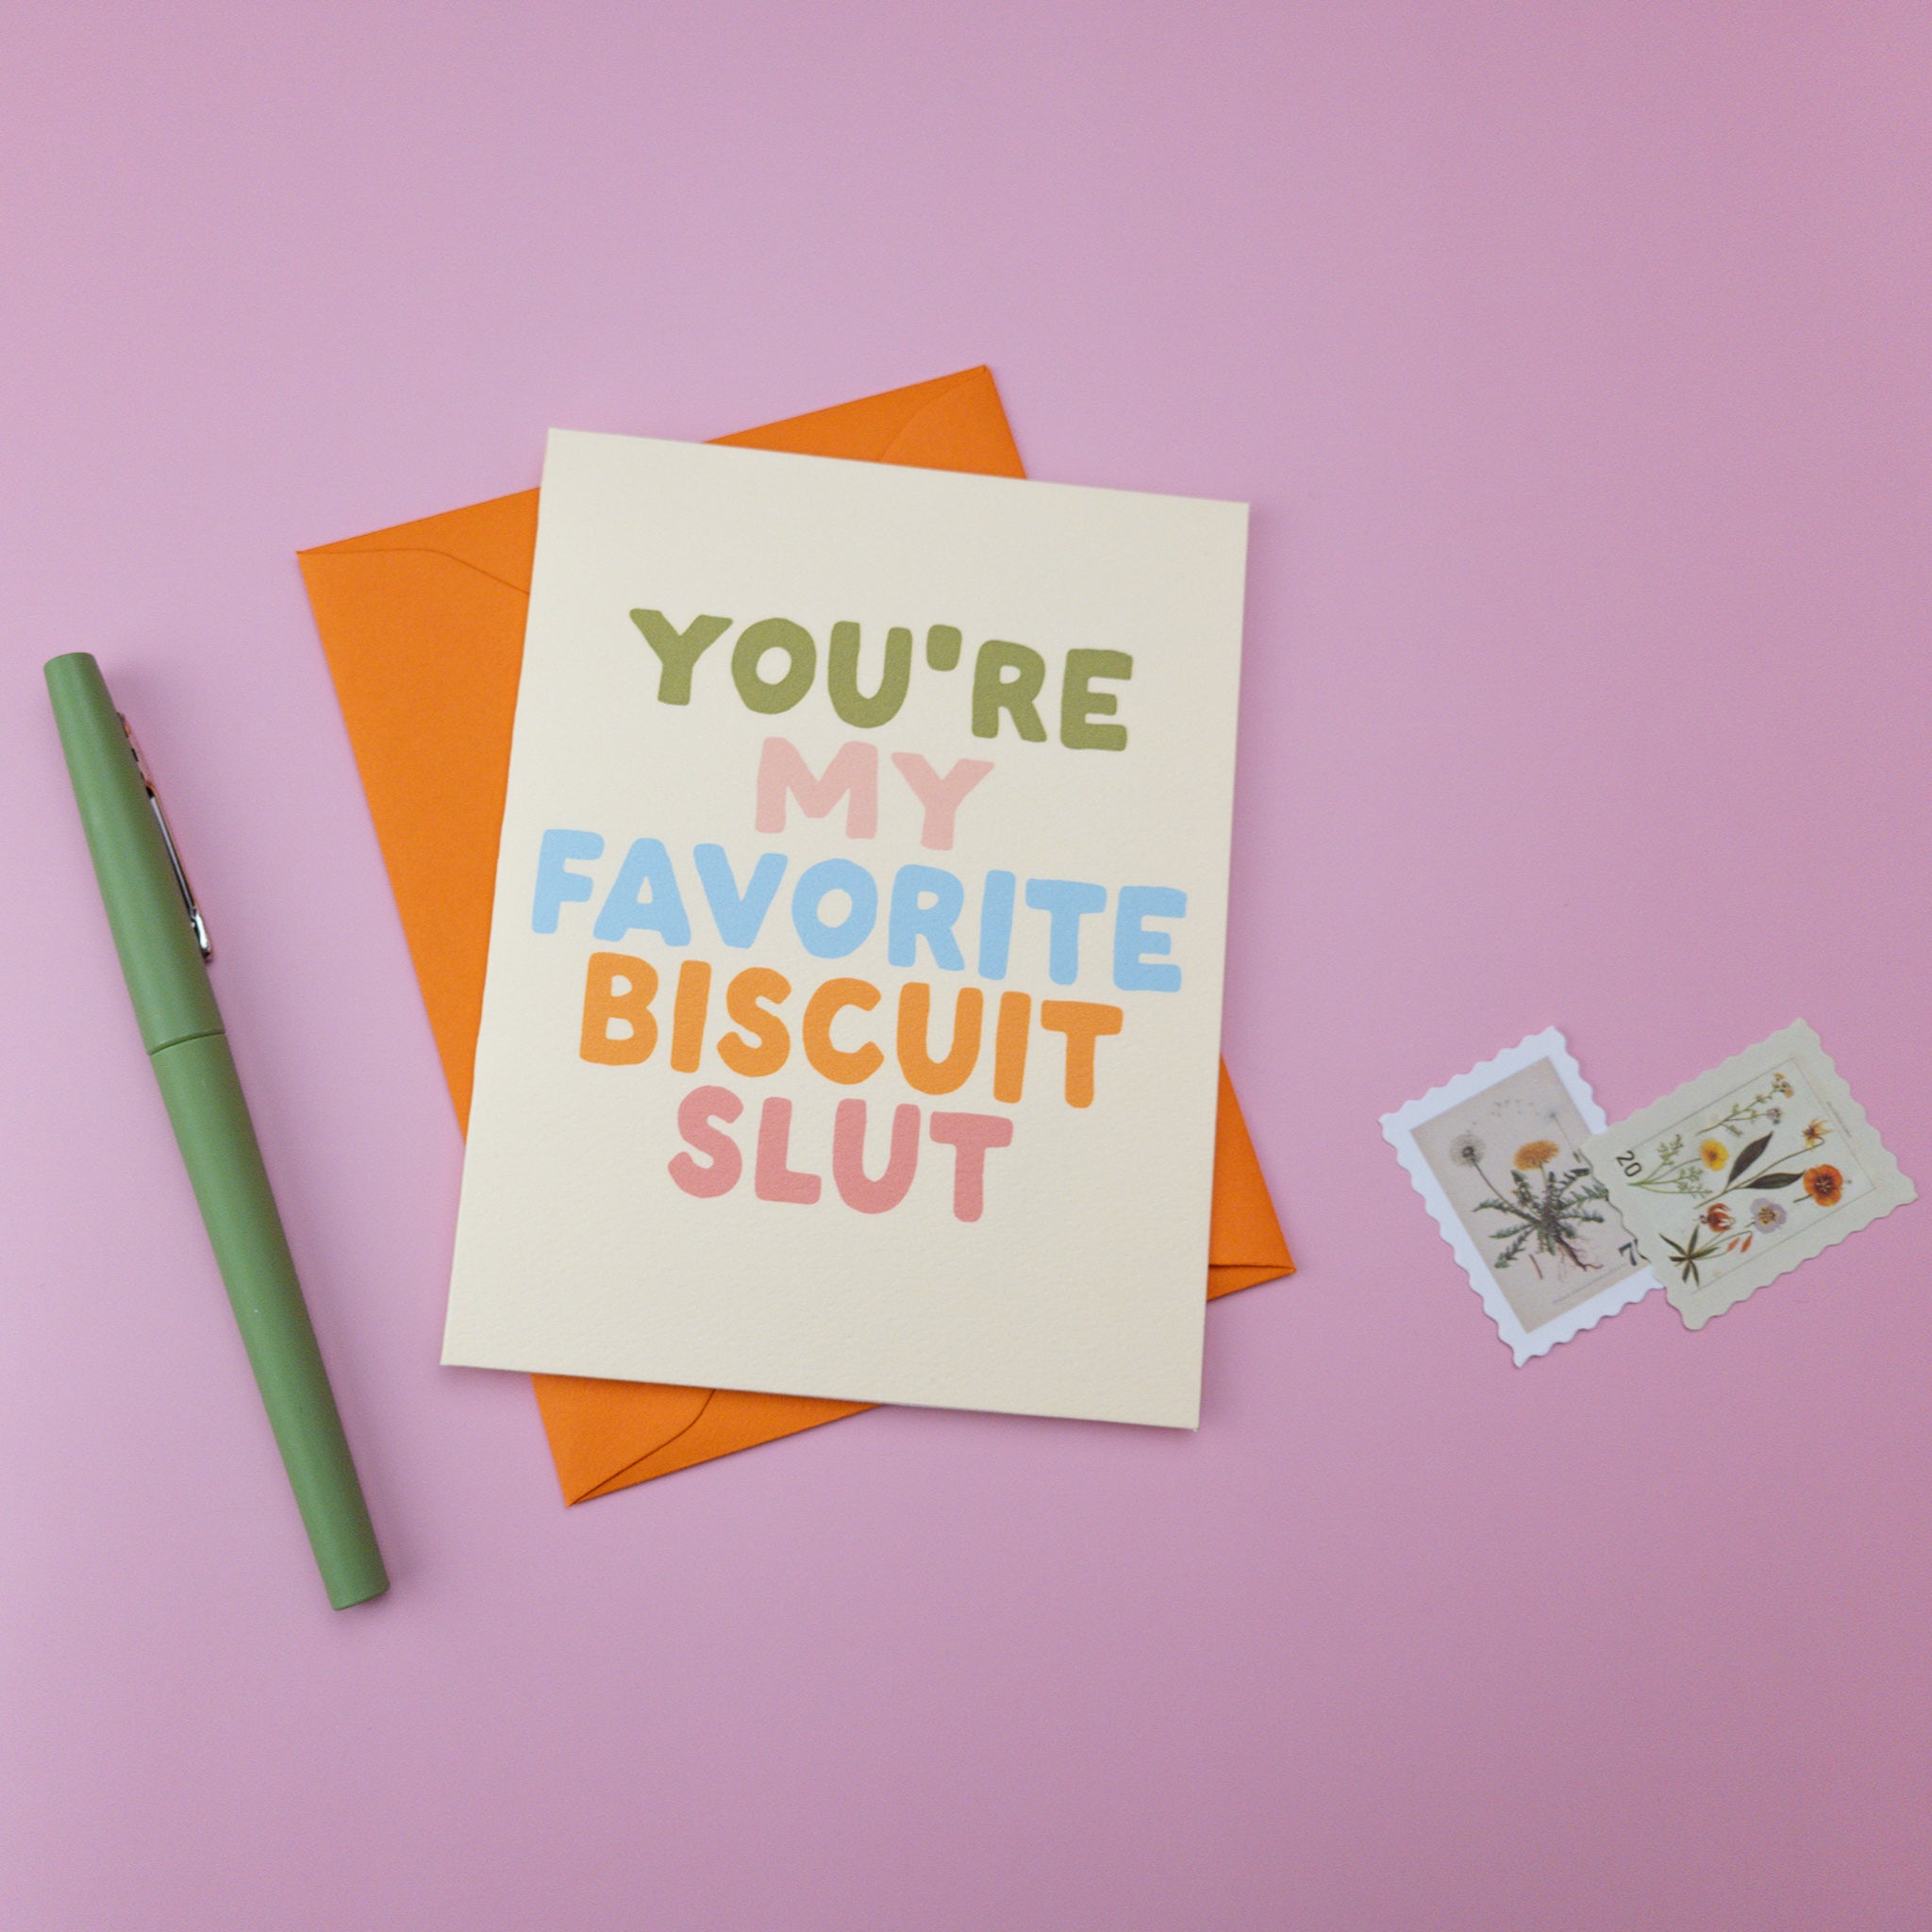 You’re My Favorite Biscuit Slut Funny Love Card